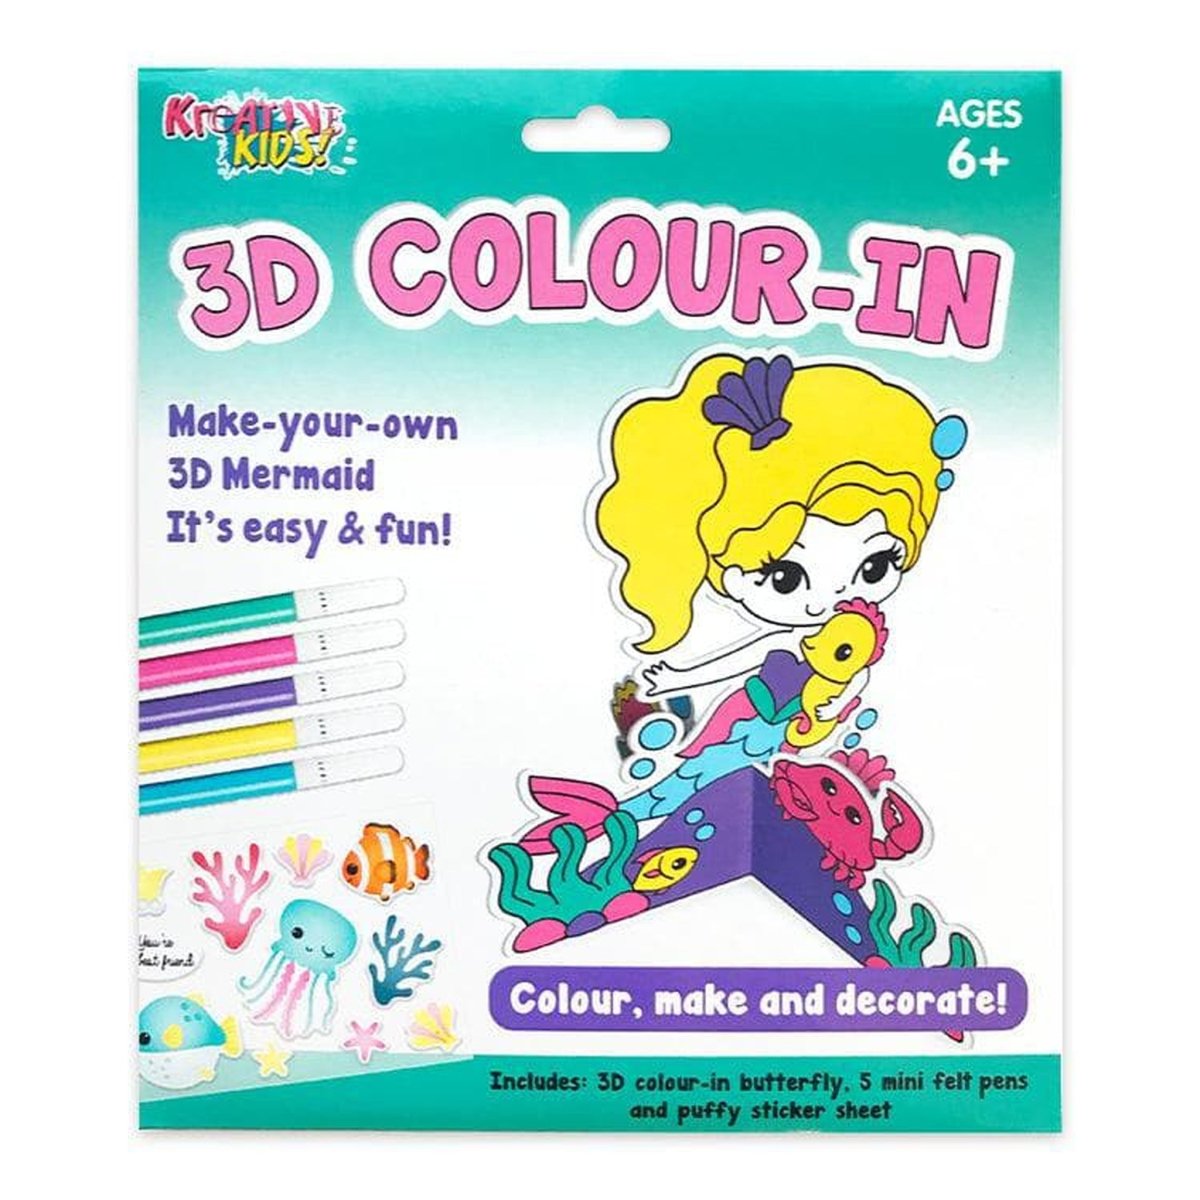 Mermaid 3D Colouring Kit - Kids Party Craft